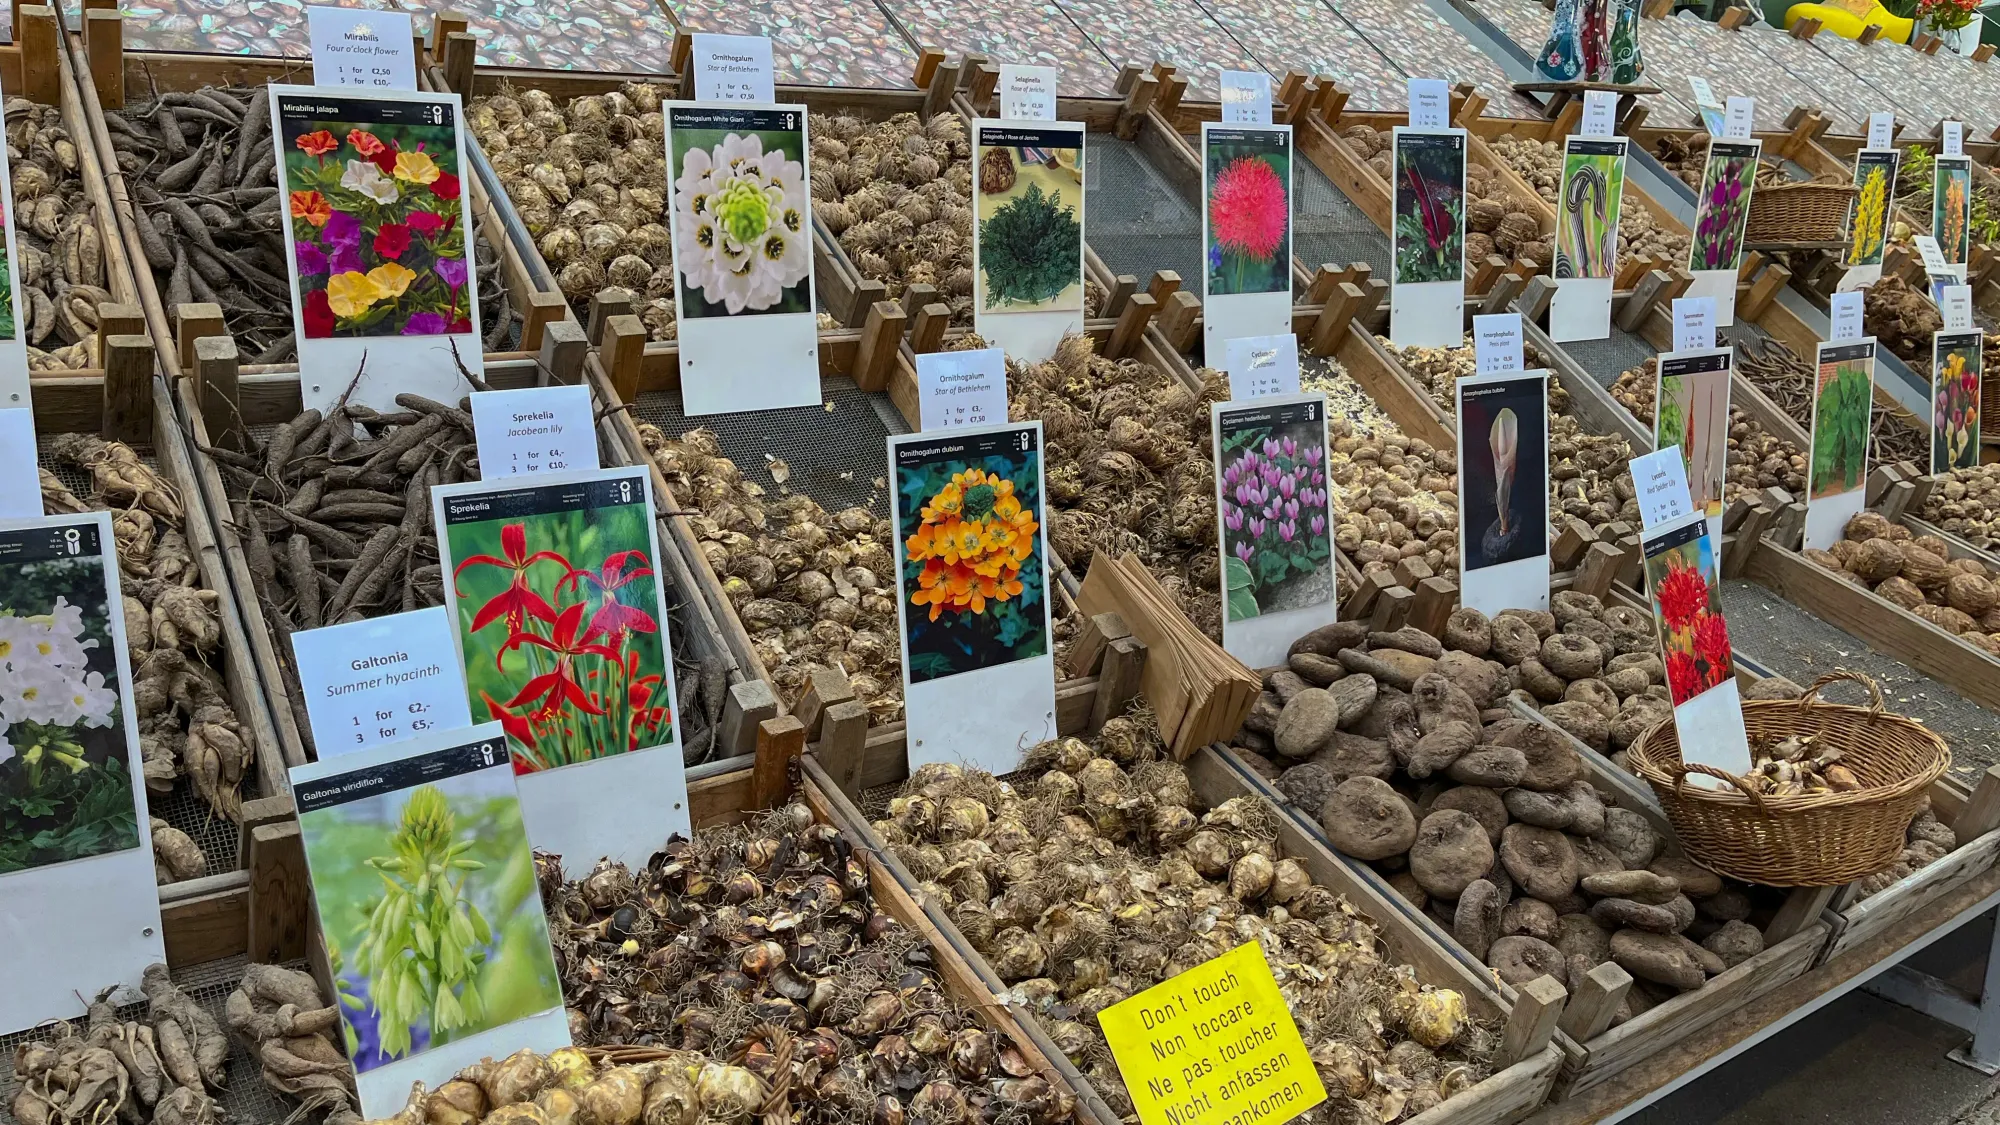 Boxes of flower bulbs in a stand